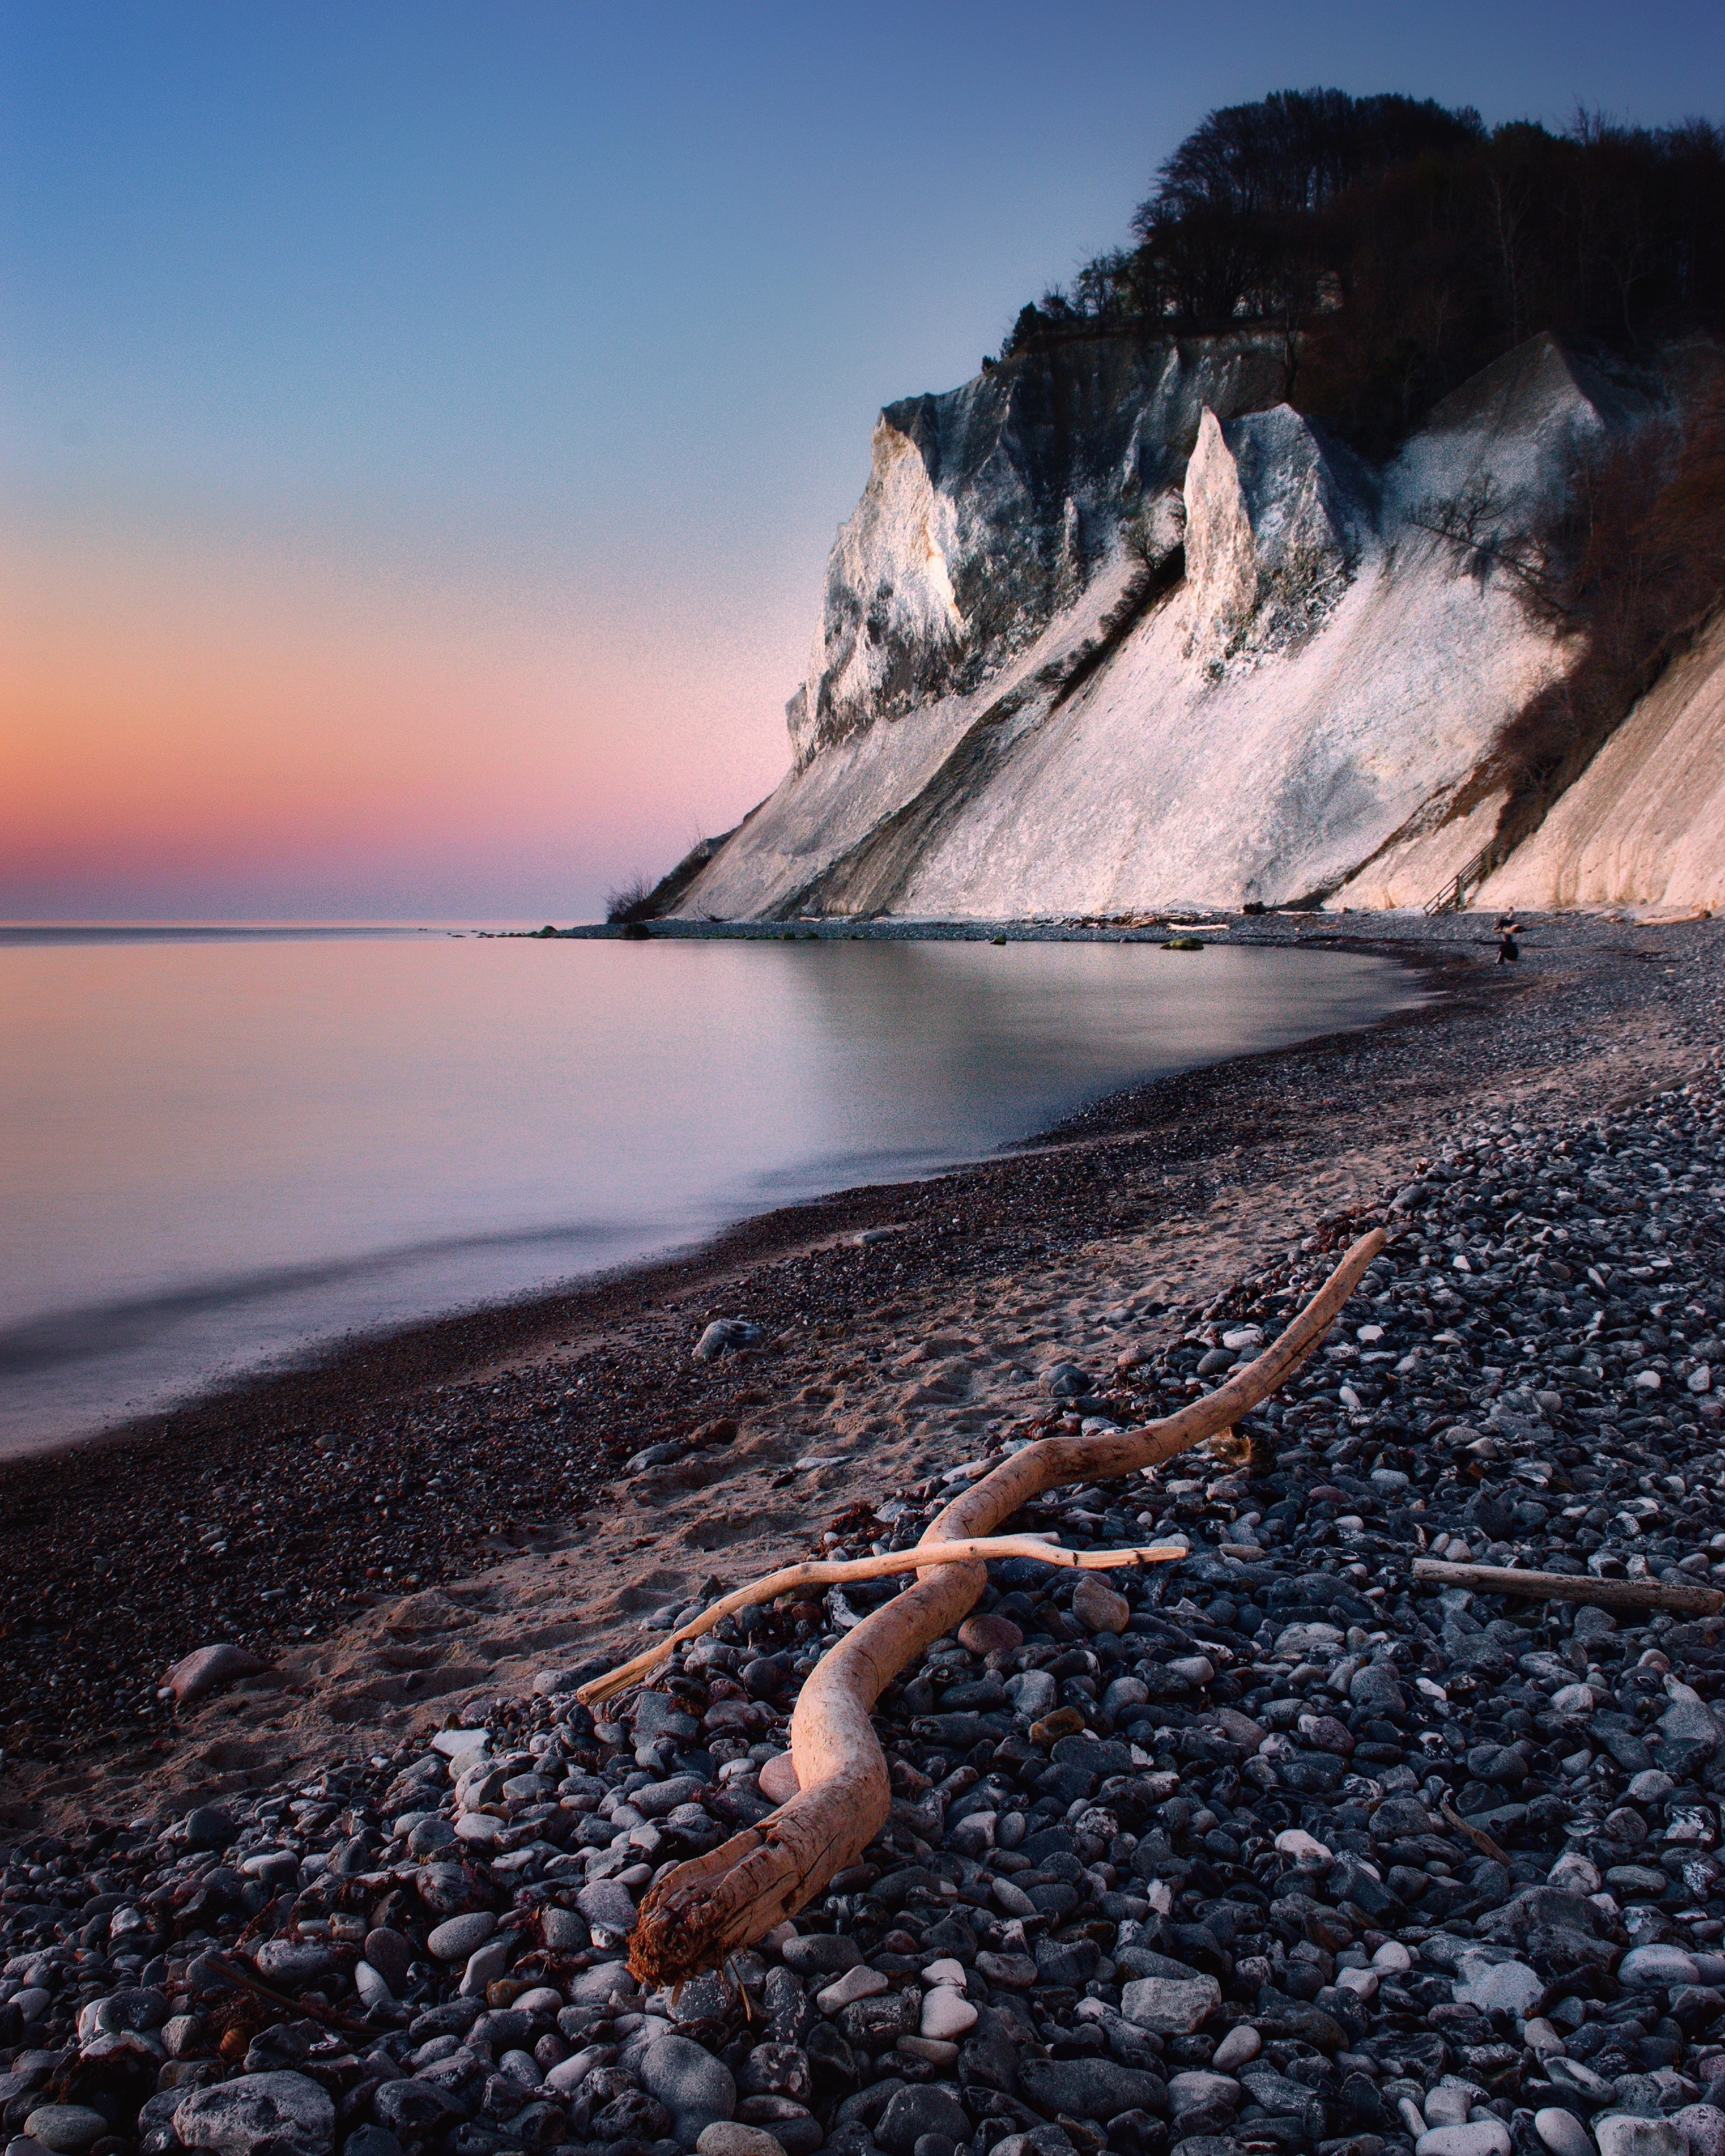 Møns Klint is a 6 km stretch of chalk cliffs along the eastern coast of the Danish island of Møn in the Baltic Sea. Some of the cliffs fall a sheer 120 m to the sea below. 
Visit the Geocenter Møns Klint in the daytime - or watch the stars on the beautiful night sky in this Dark Sky area.
#sunrise #ocean #longexposure #pebble #cliff #darksky #chalk #morning